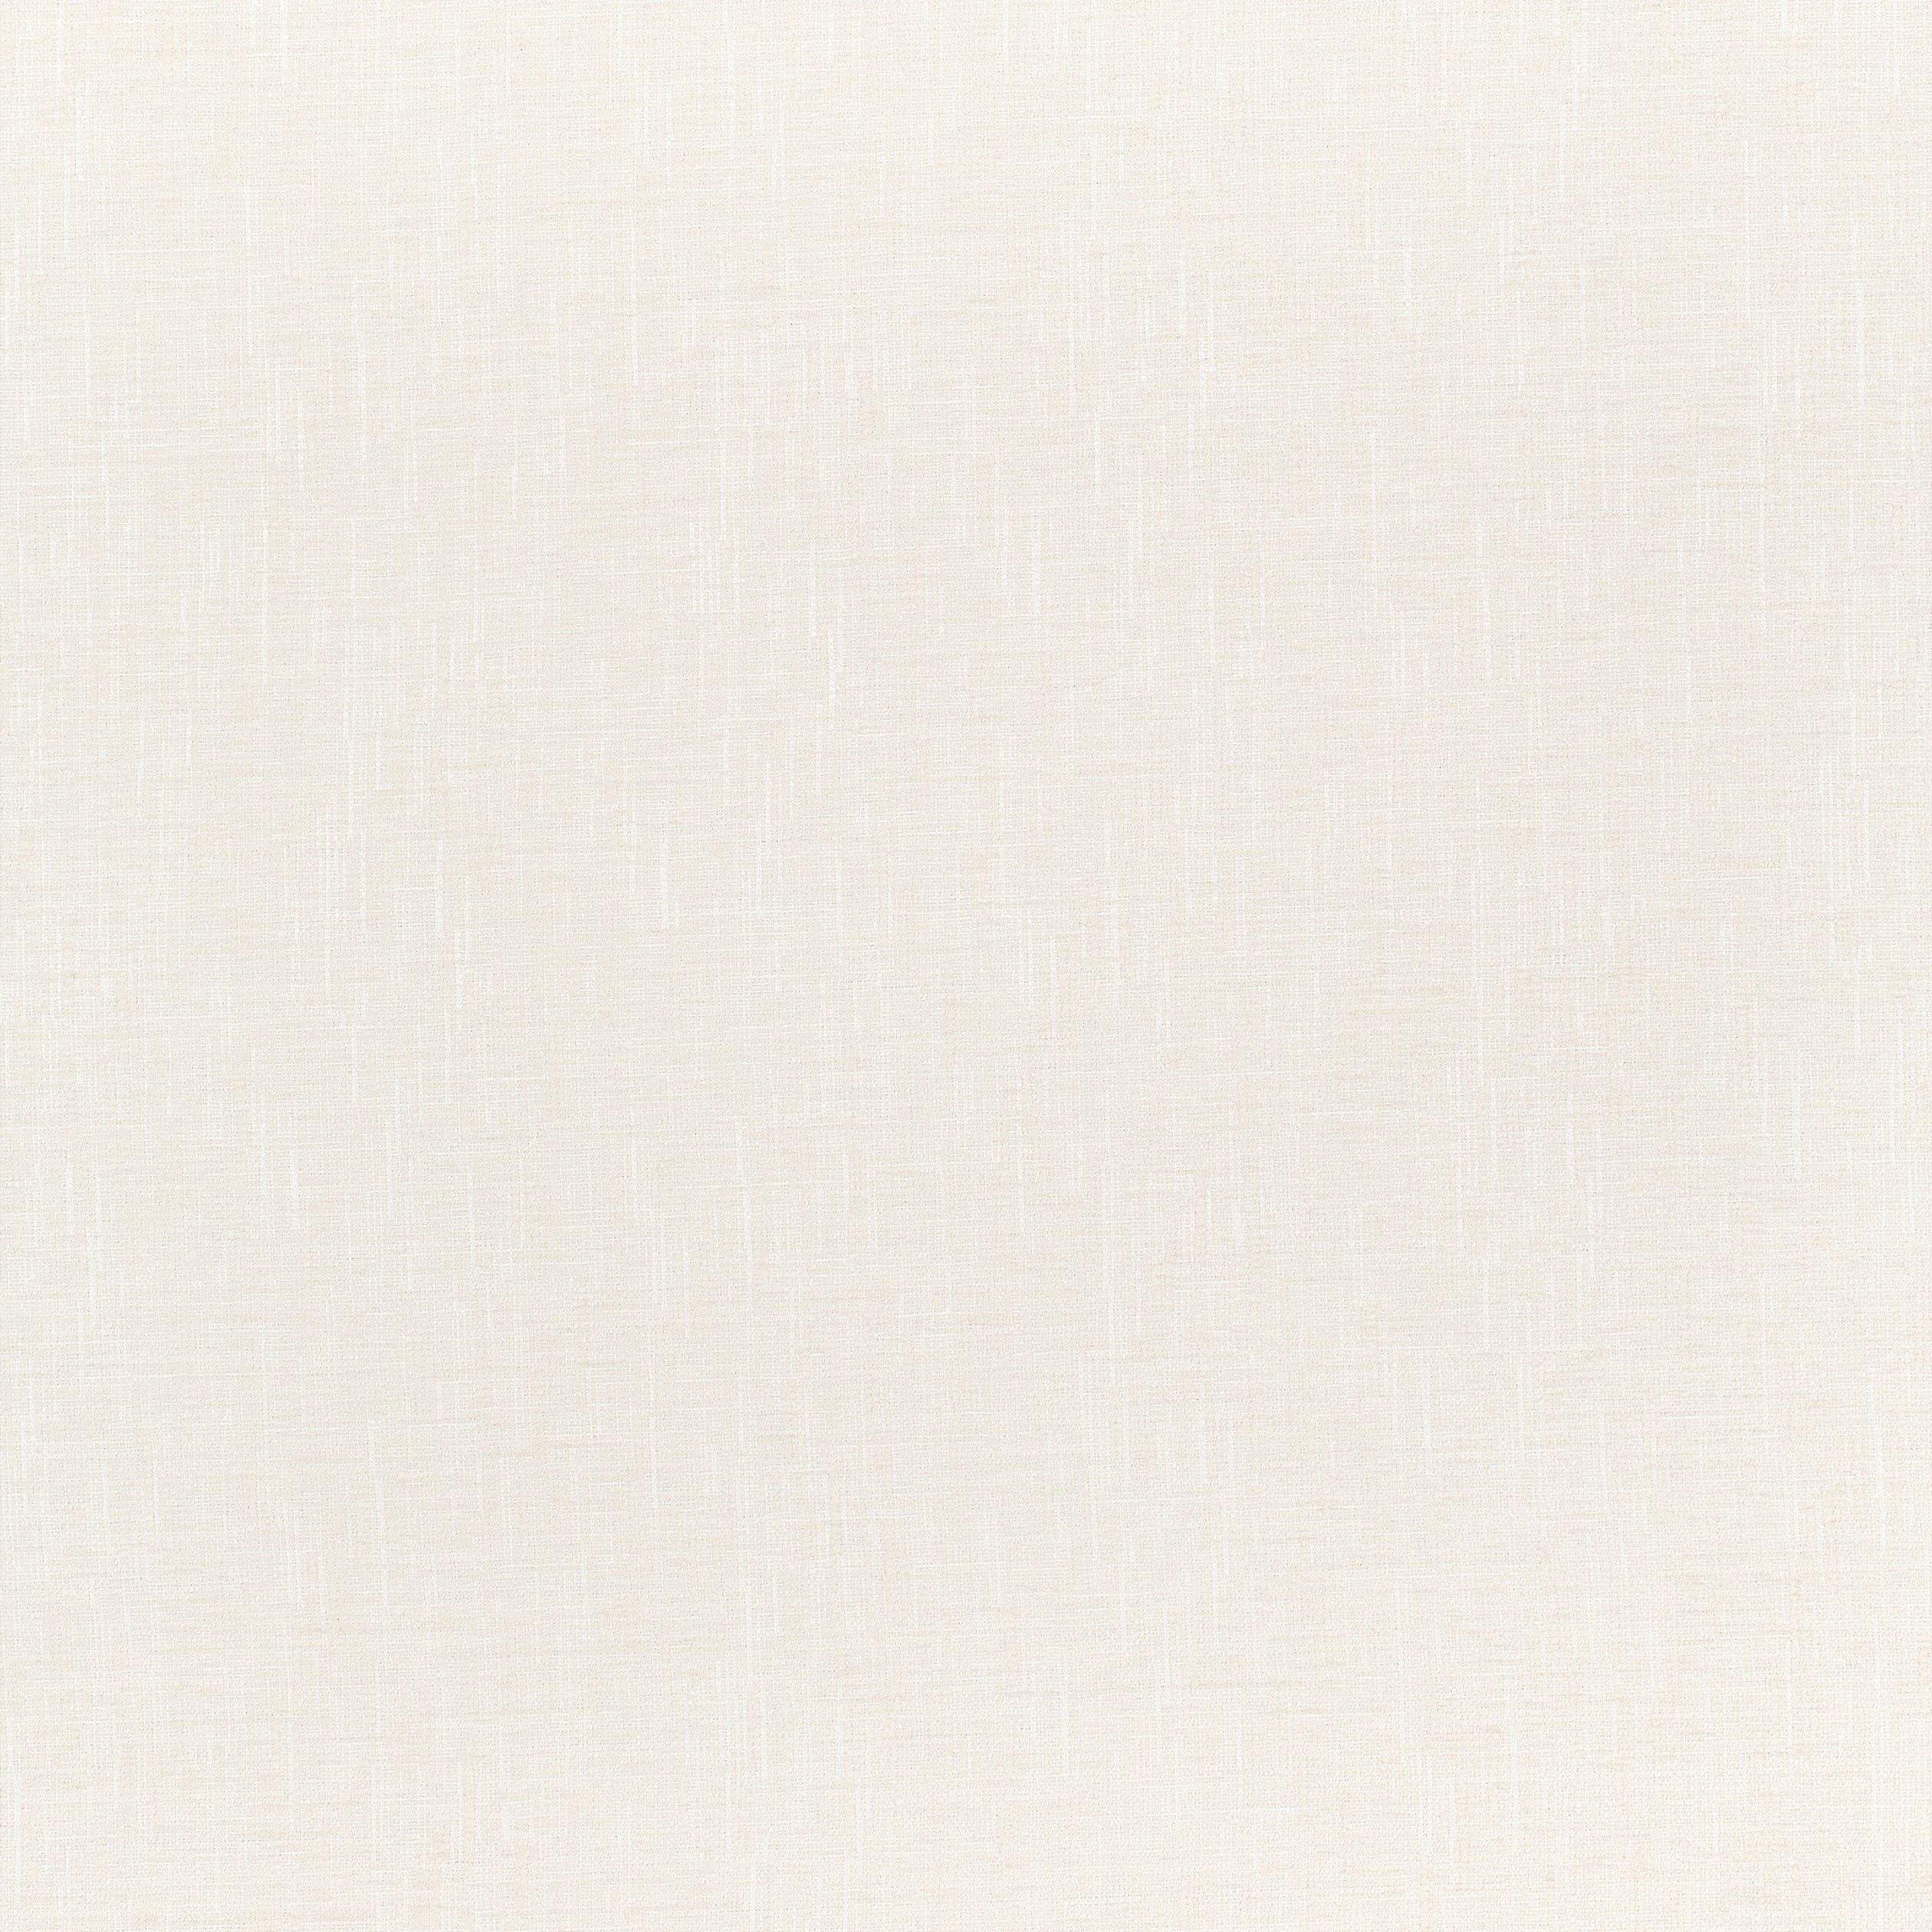 Montage fabric in white color - pattern number W80476 - by Thibaut in the Mosaic collection